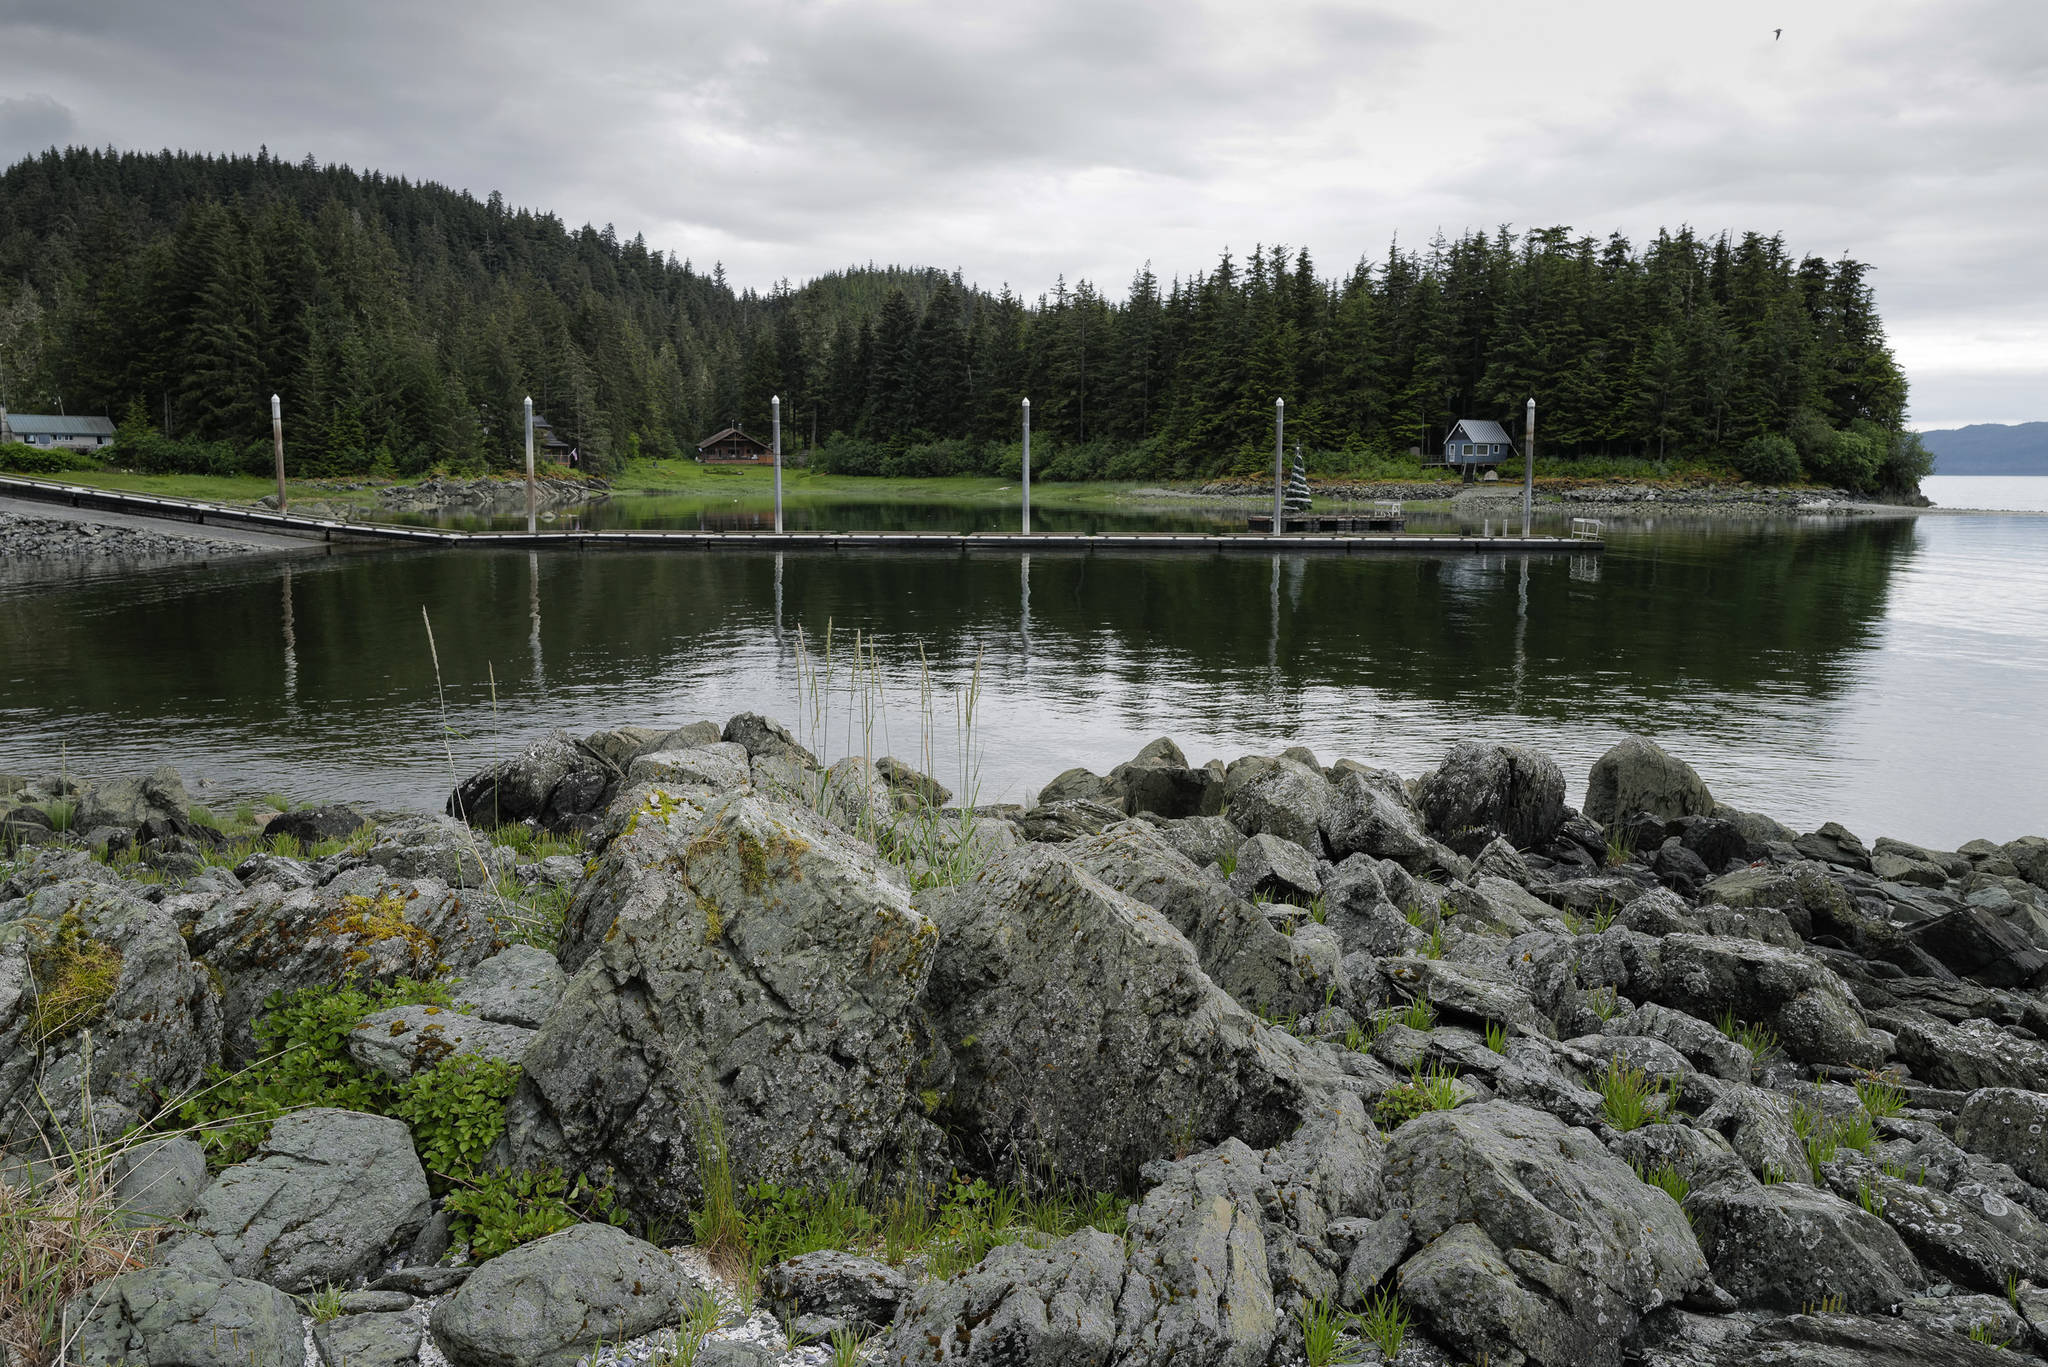 The city-owned boat launch at Amalga Harbor on Wednesday, June 19, 2019. (Michael Penn | Juneau Empire)